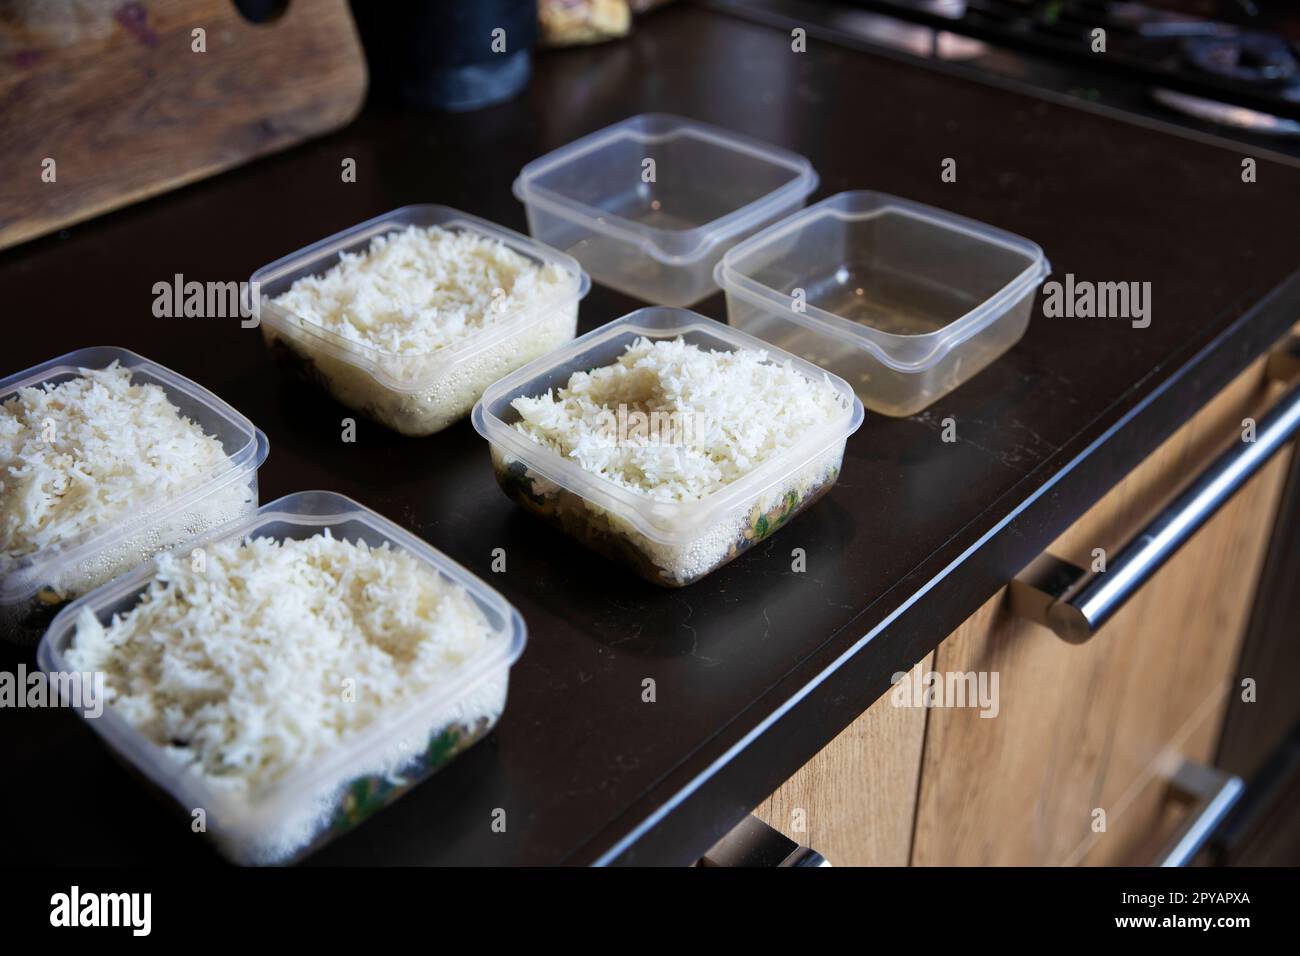 Meal prep. Stack of home cooked rice and chicken dinners in containers ready to be frozen for later use as quick and easy ready meals. Food prepping for healthy dieting Stock Photo